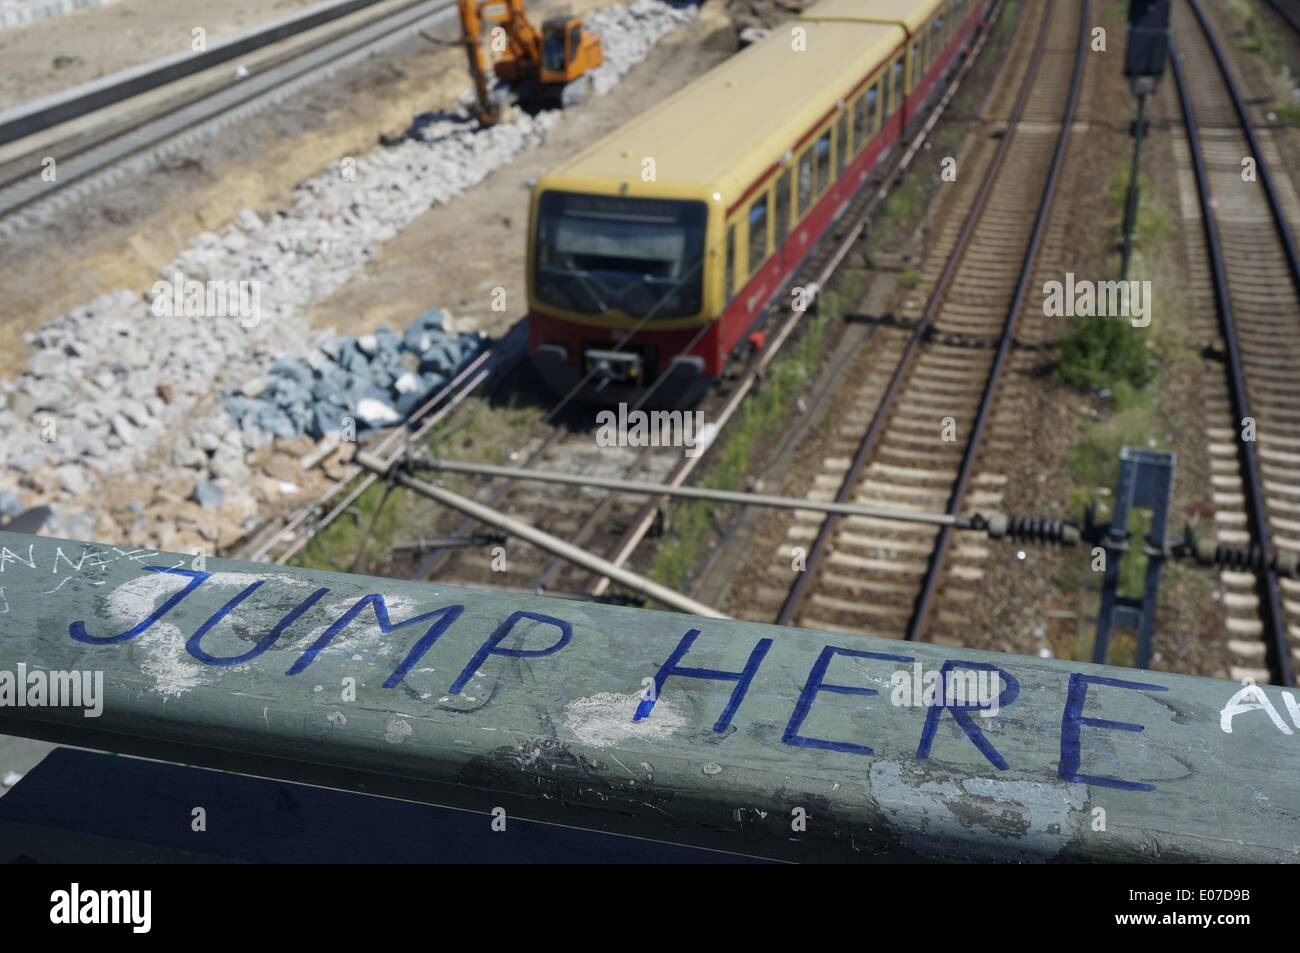 The lettering 'Jump here' is written on the handrail of the Warschauer Bruecke bridge arching train tracks and a city train in Berlin's district Friedrichshain, Germany, 21 July 2013. Photo: Berliner Verlag /Steinach - NO WIRE SERVICE - Stock Photo